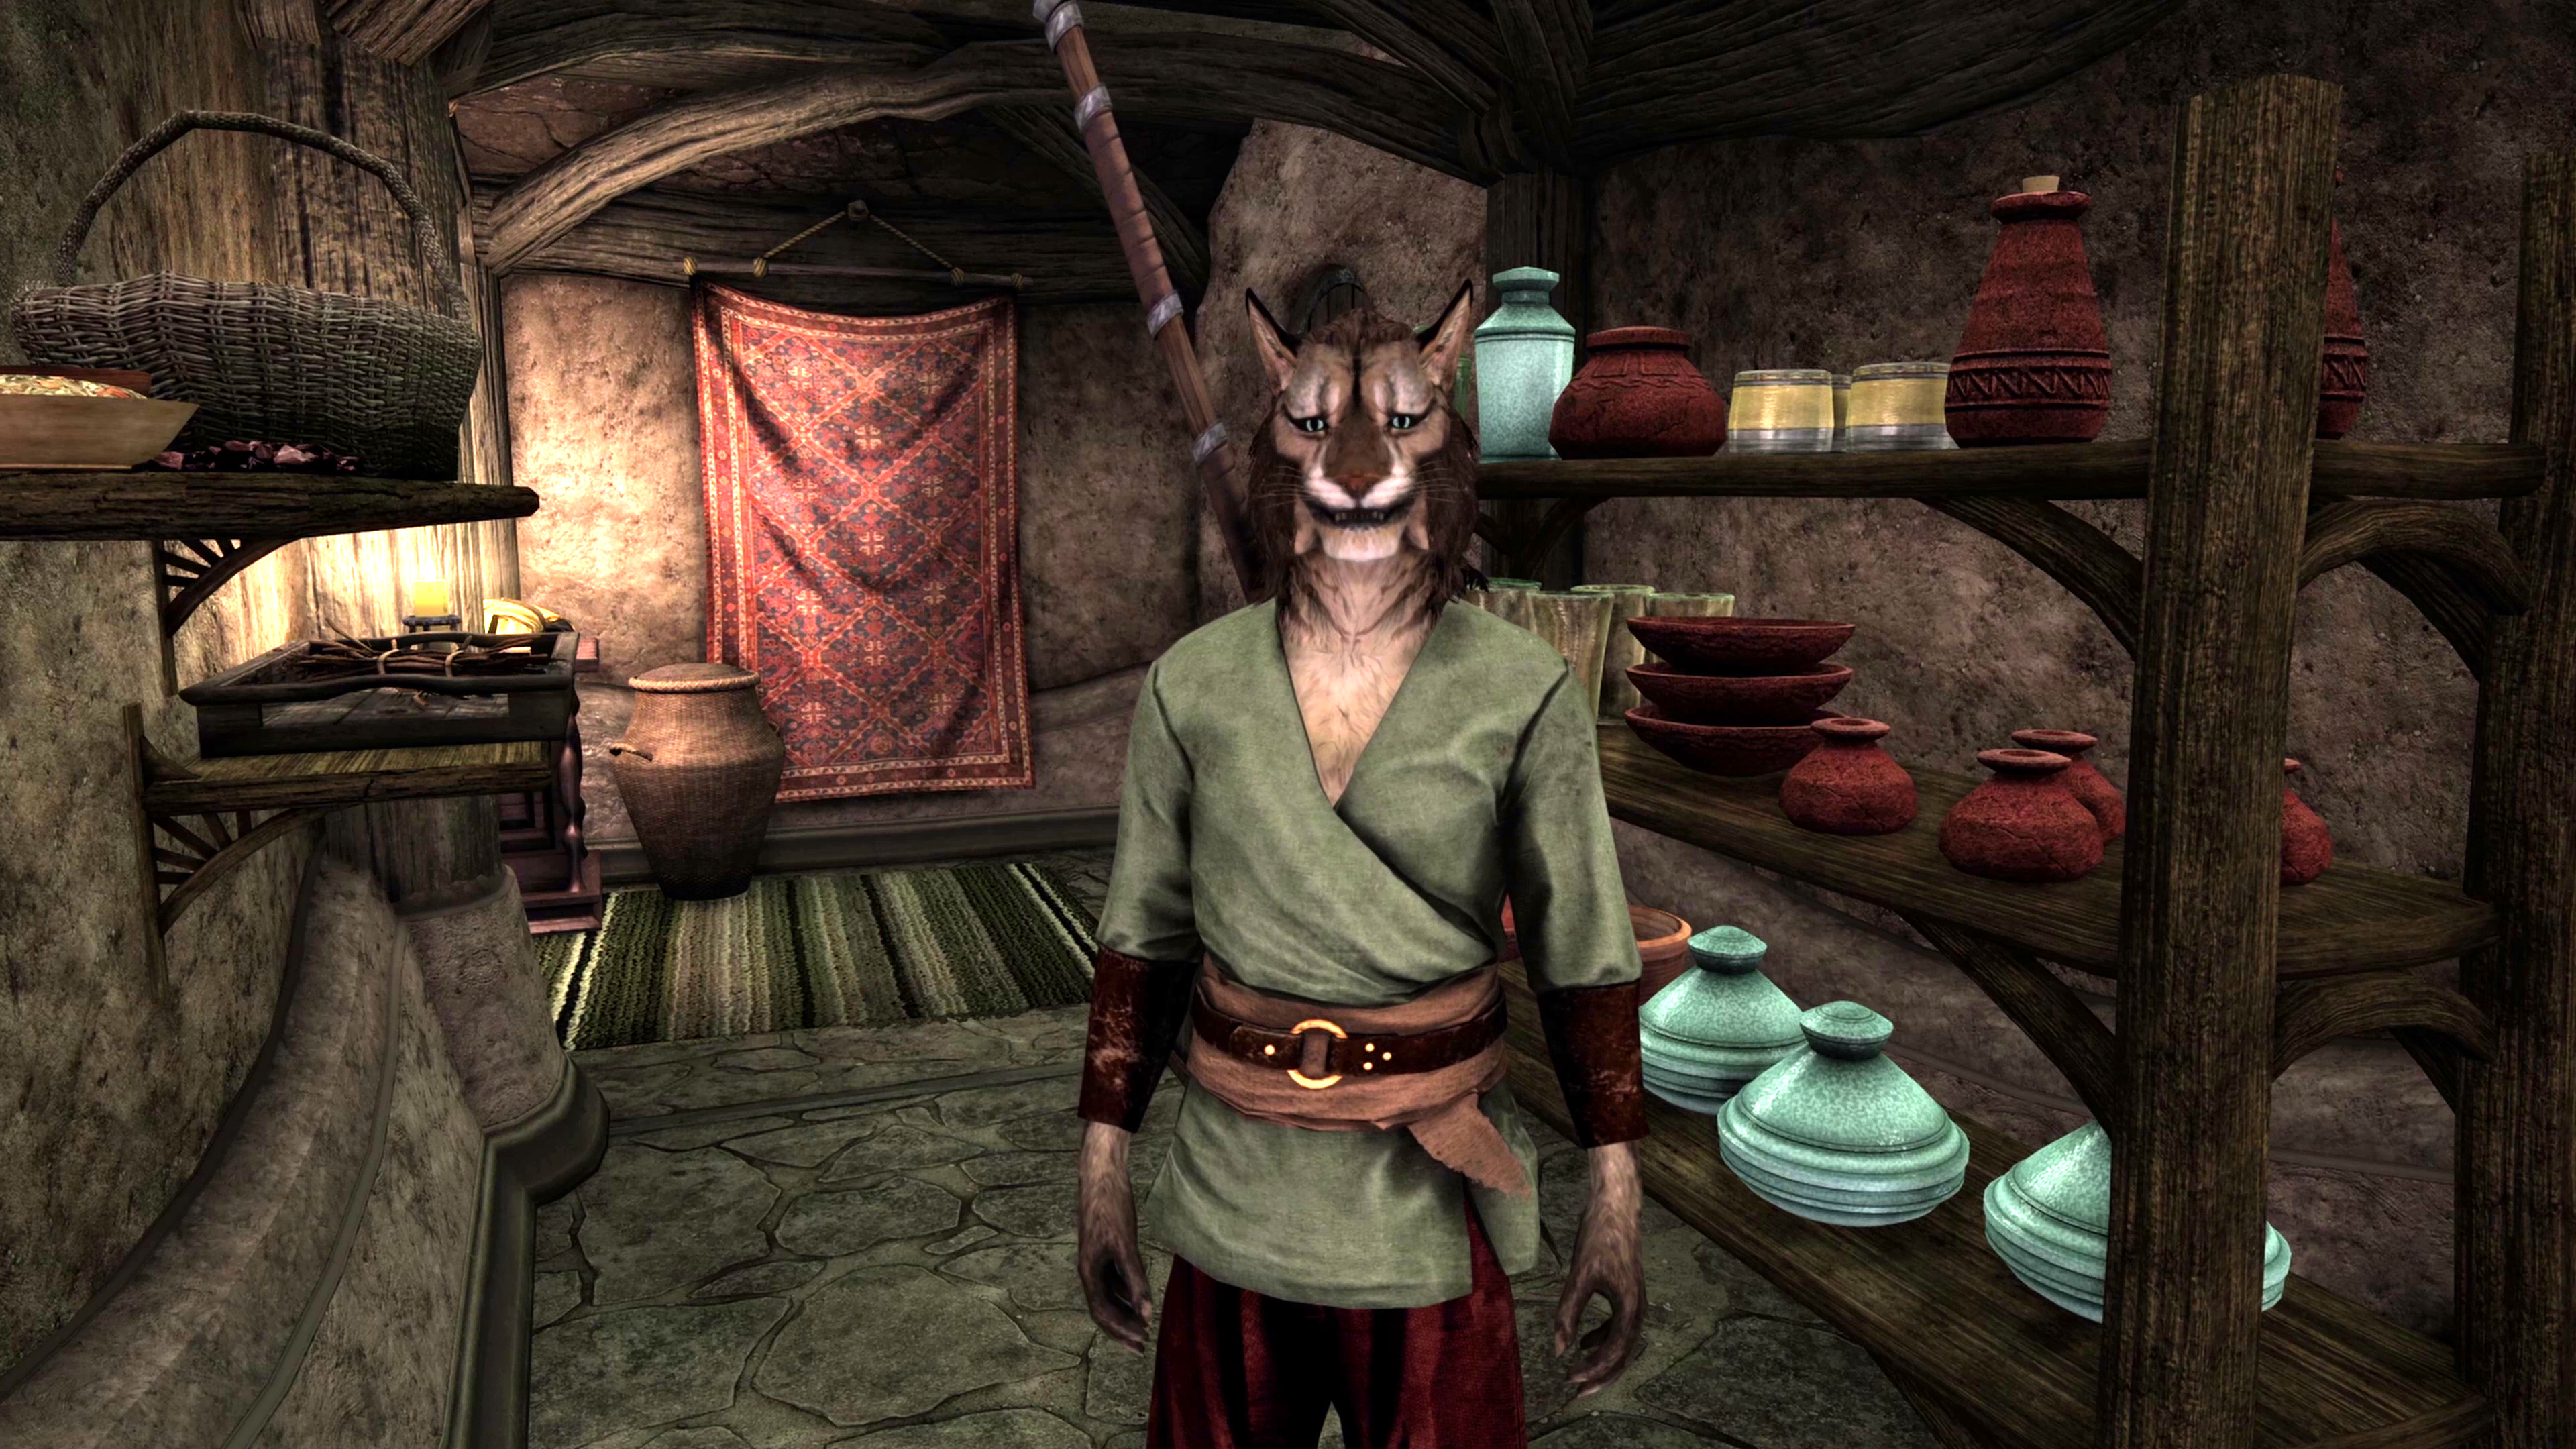  Skywind, the ambitious mod remaking Morrowind in Skyrim, has over 3,000 characters—three times as many as the original Skyrim 